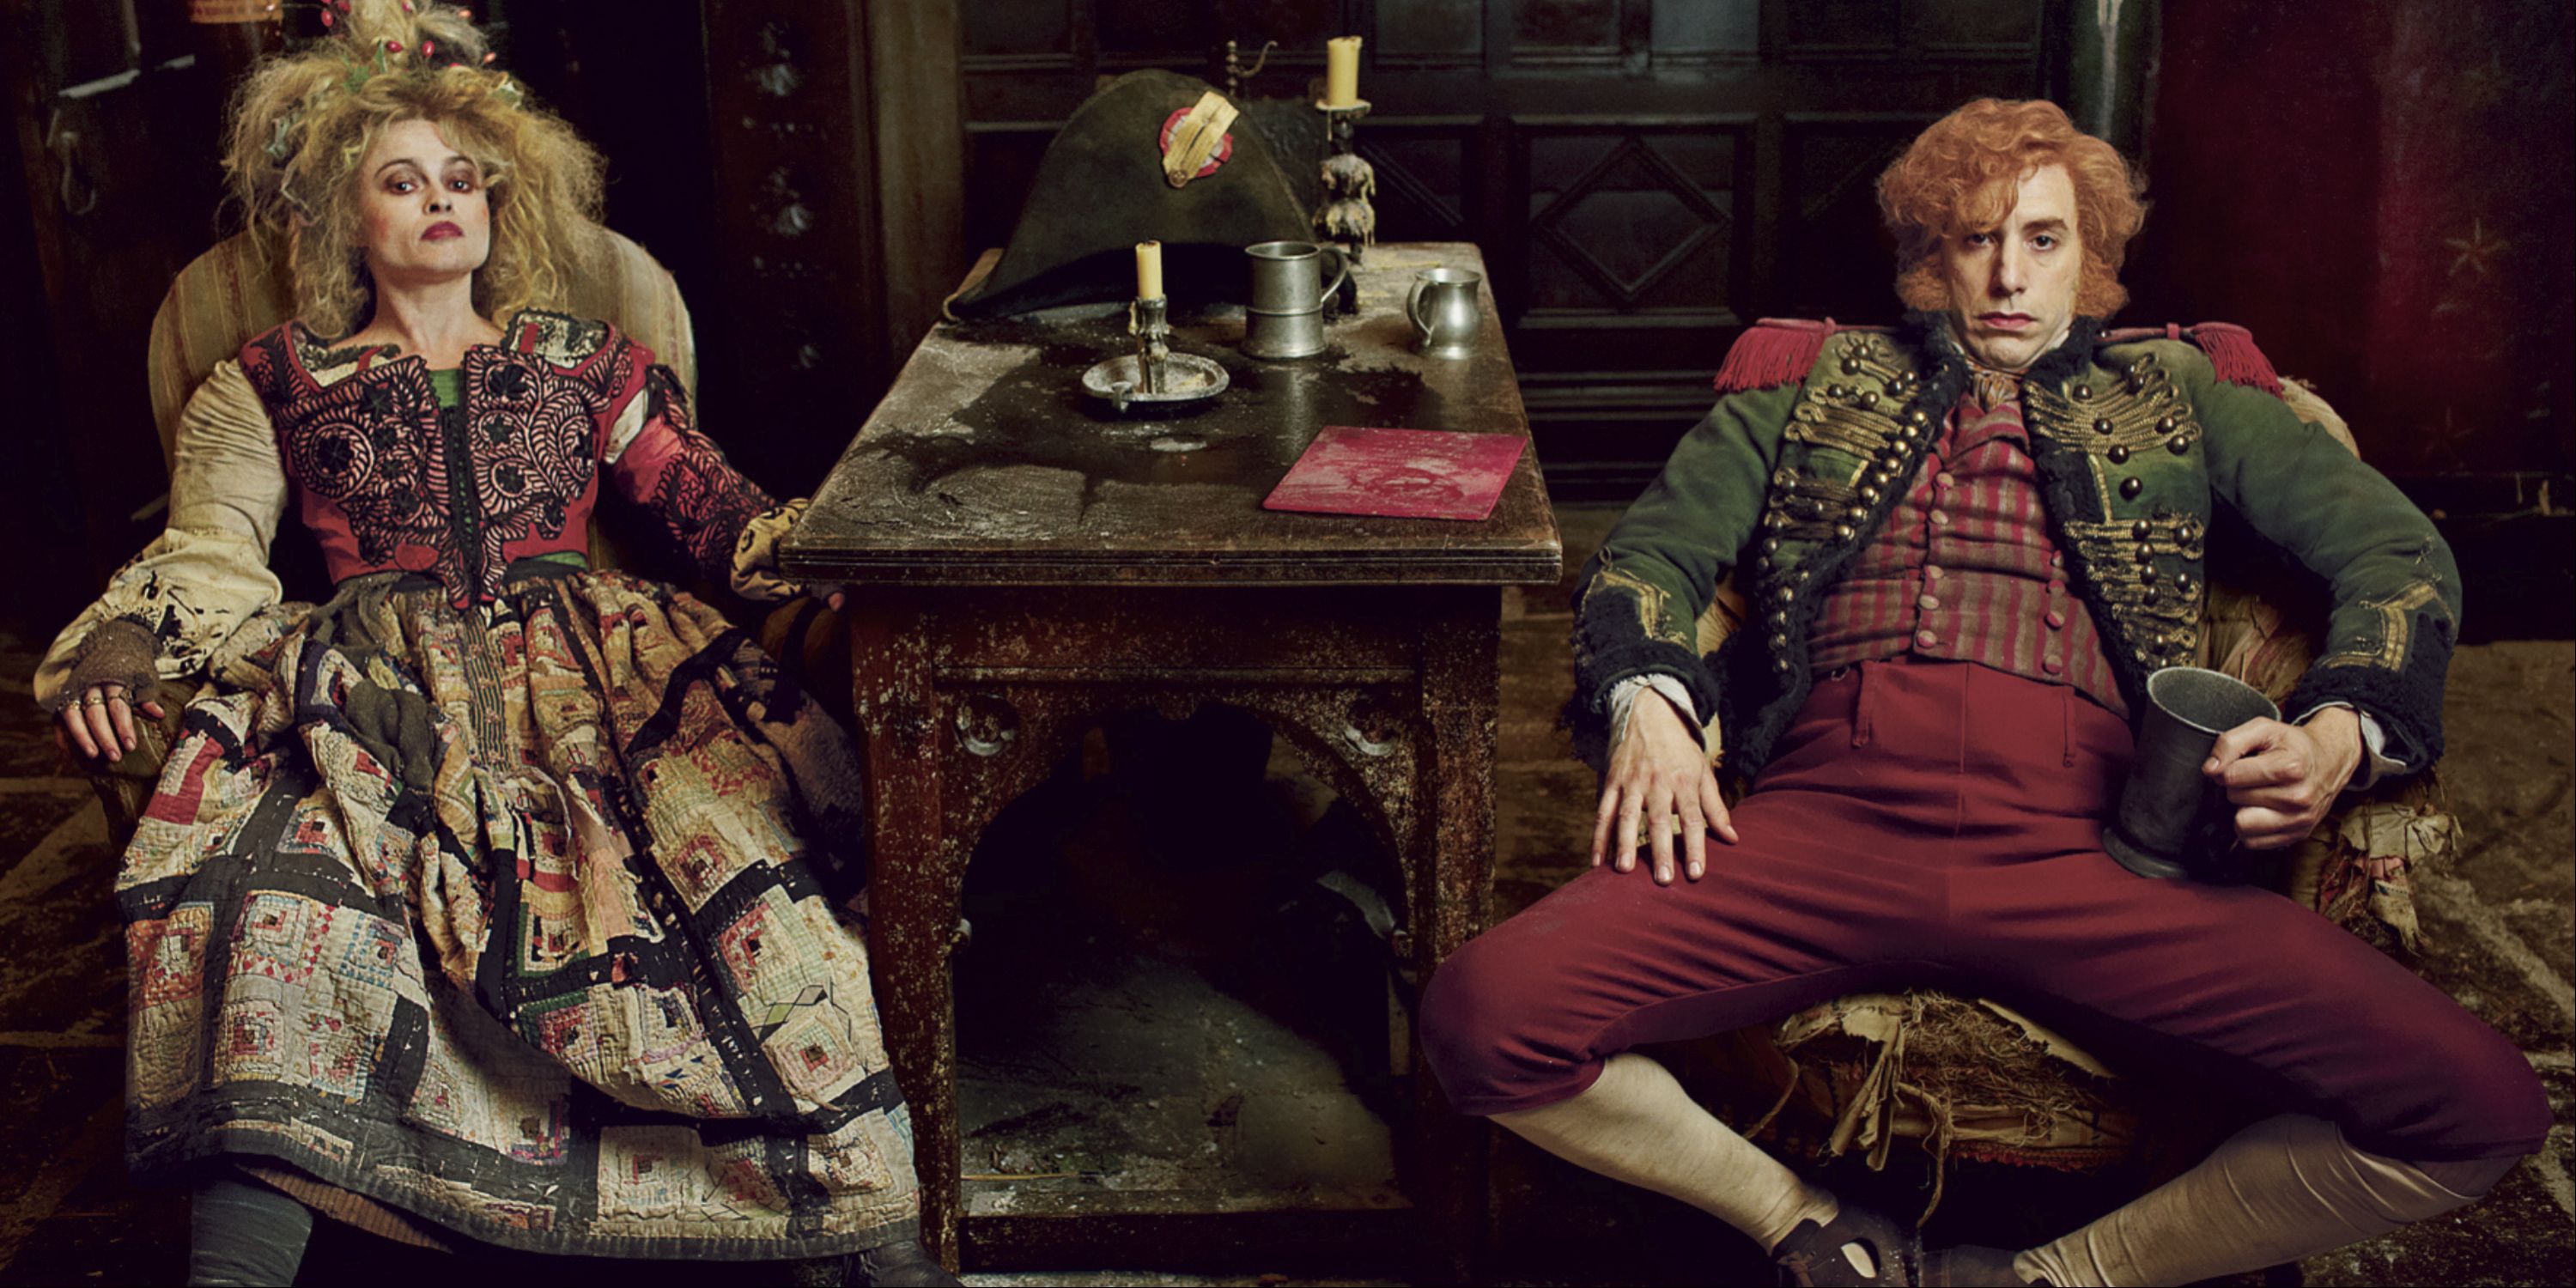 The Thenardiers played by Helena Bonham Carter and Sacha Baron Cohen sit at a table facing the camera in Les Miserables.